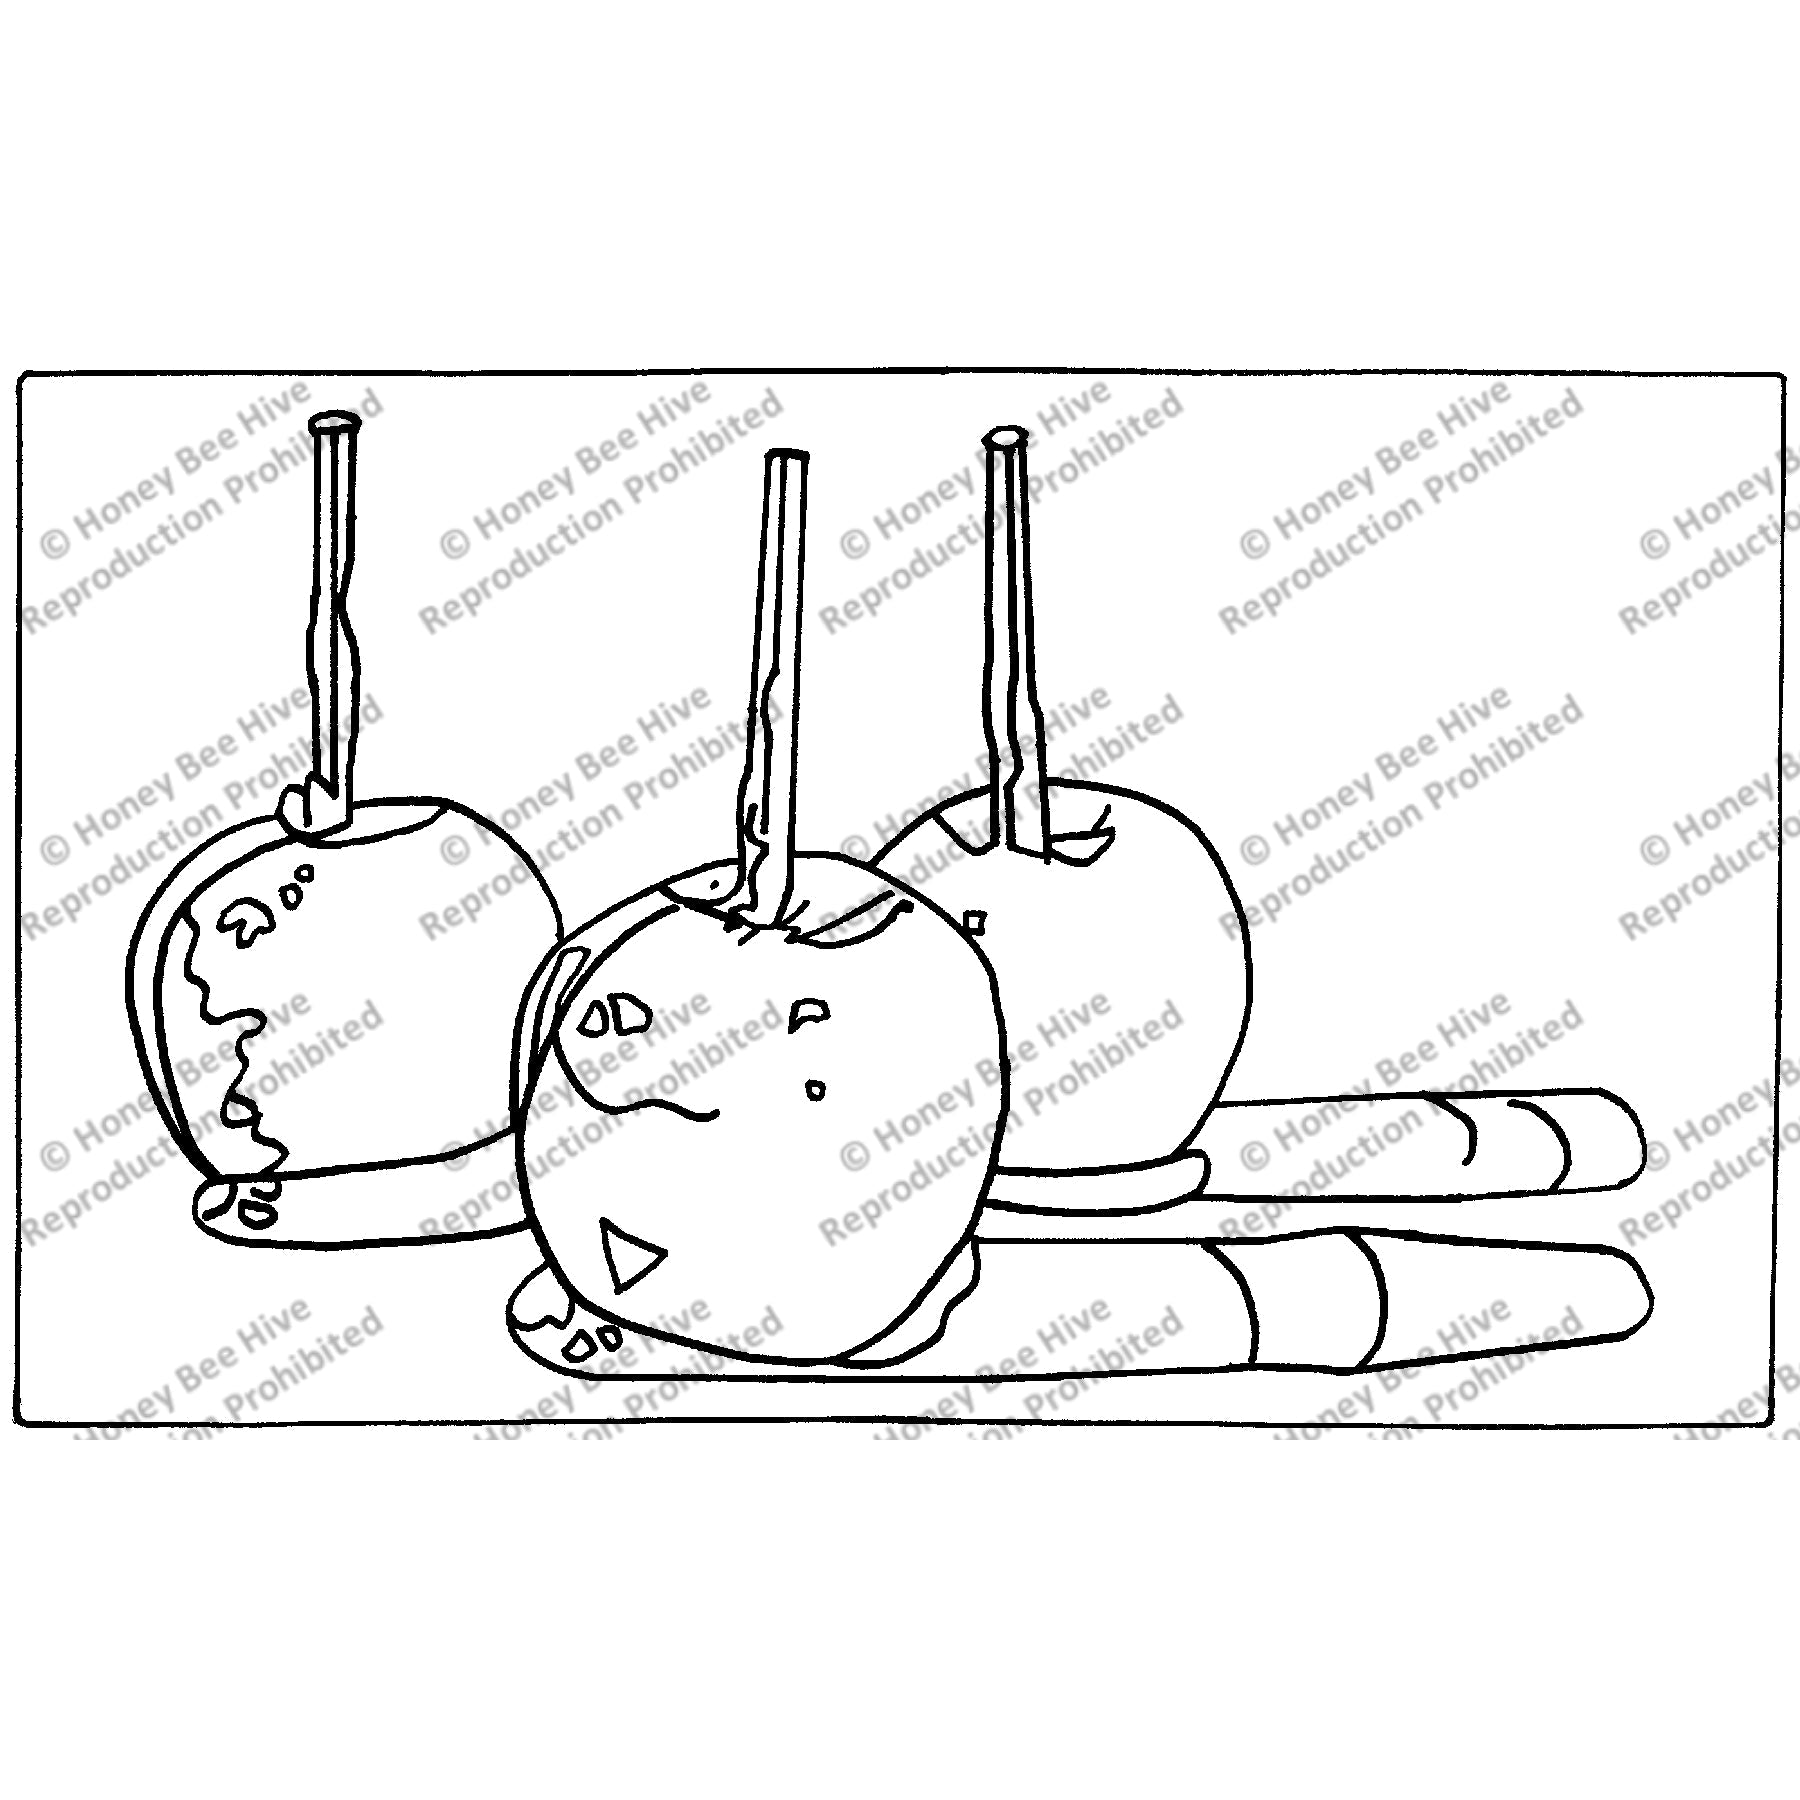 Candy Apples, rug hooking pattern